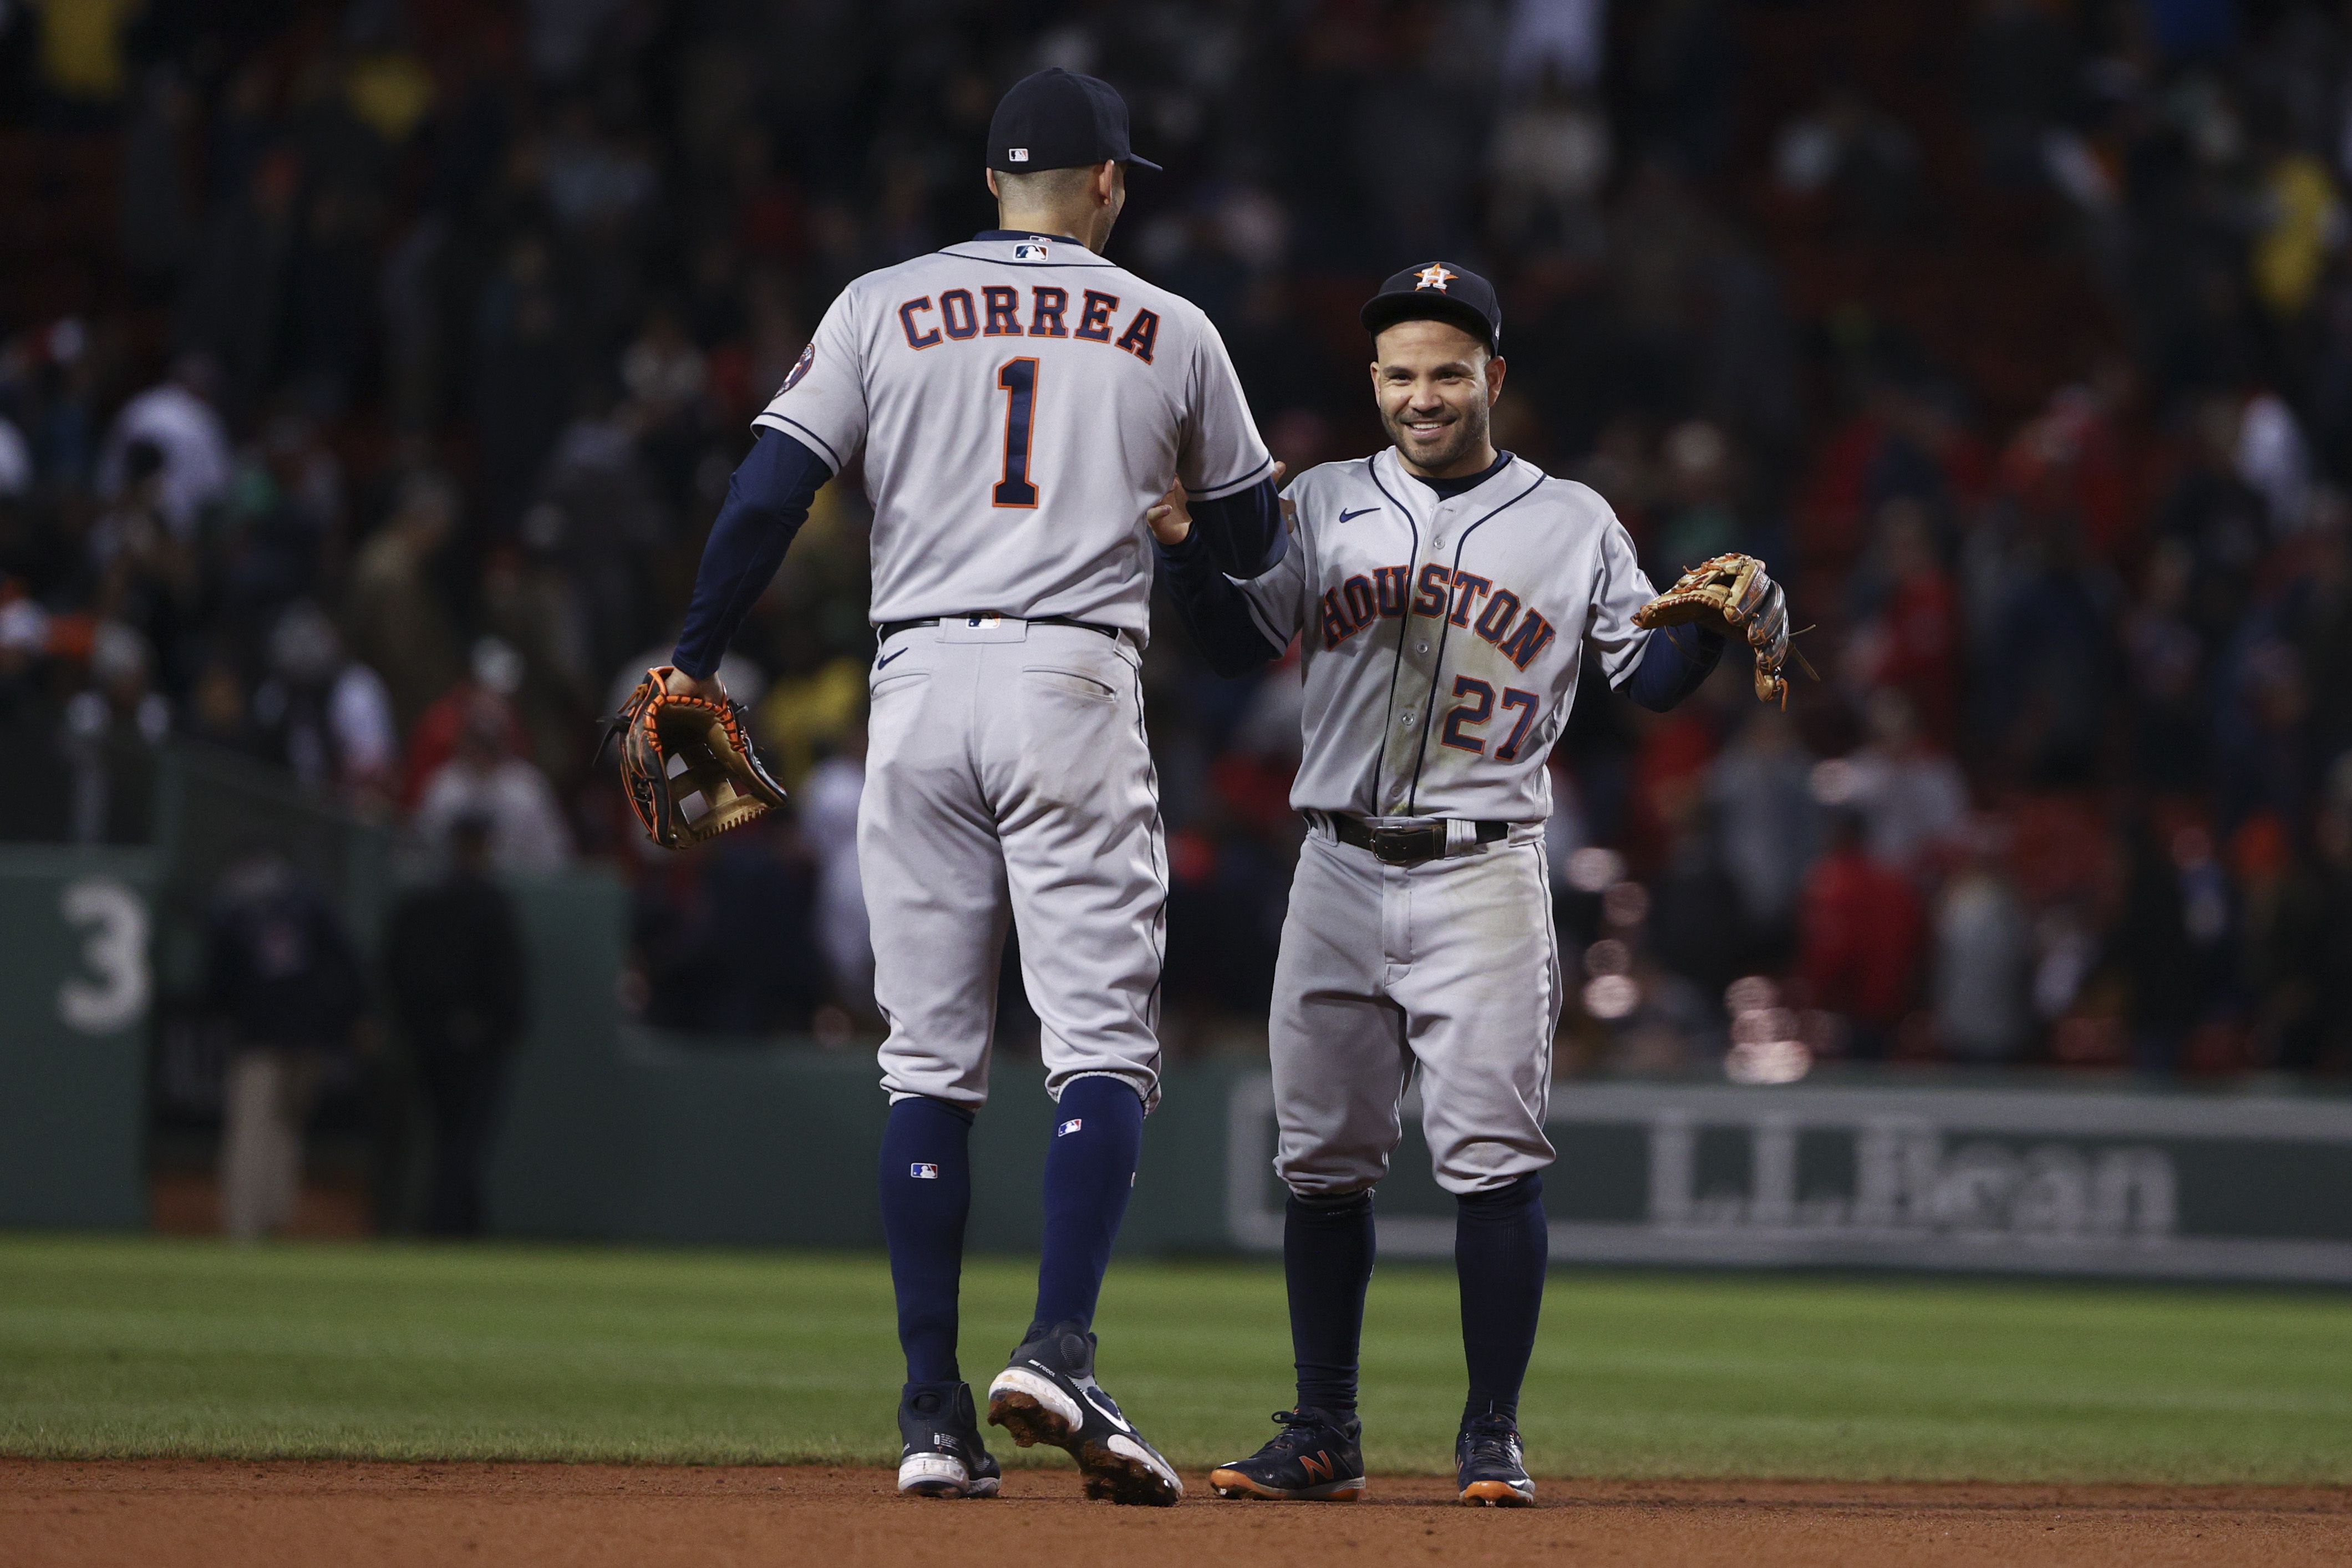 Altuve booed, nicked by pitch in spring debut for Astros – KXAN Austin